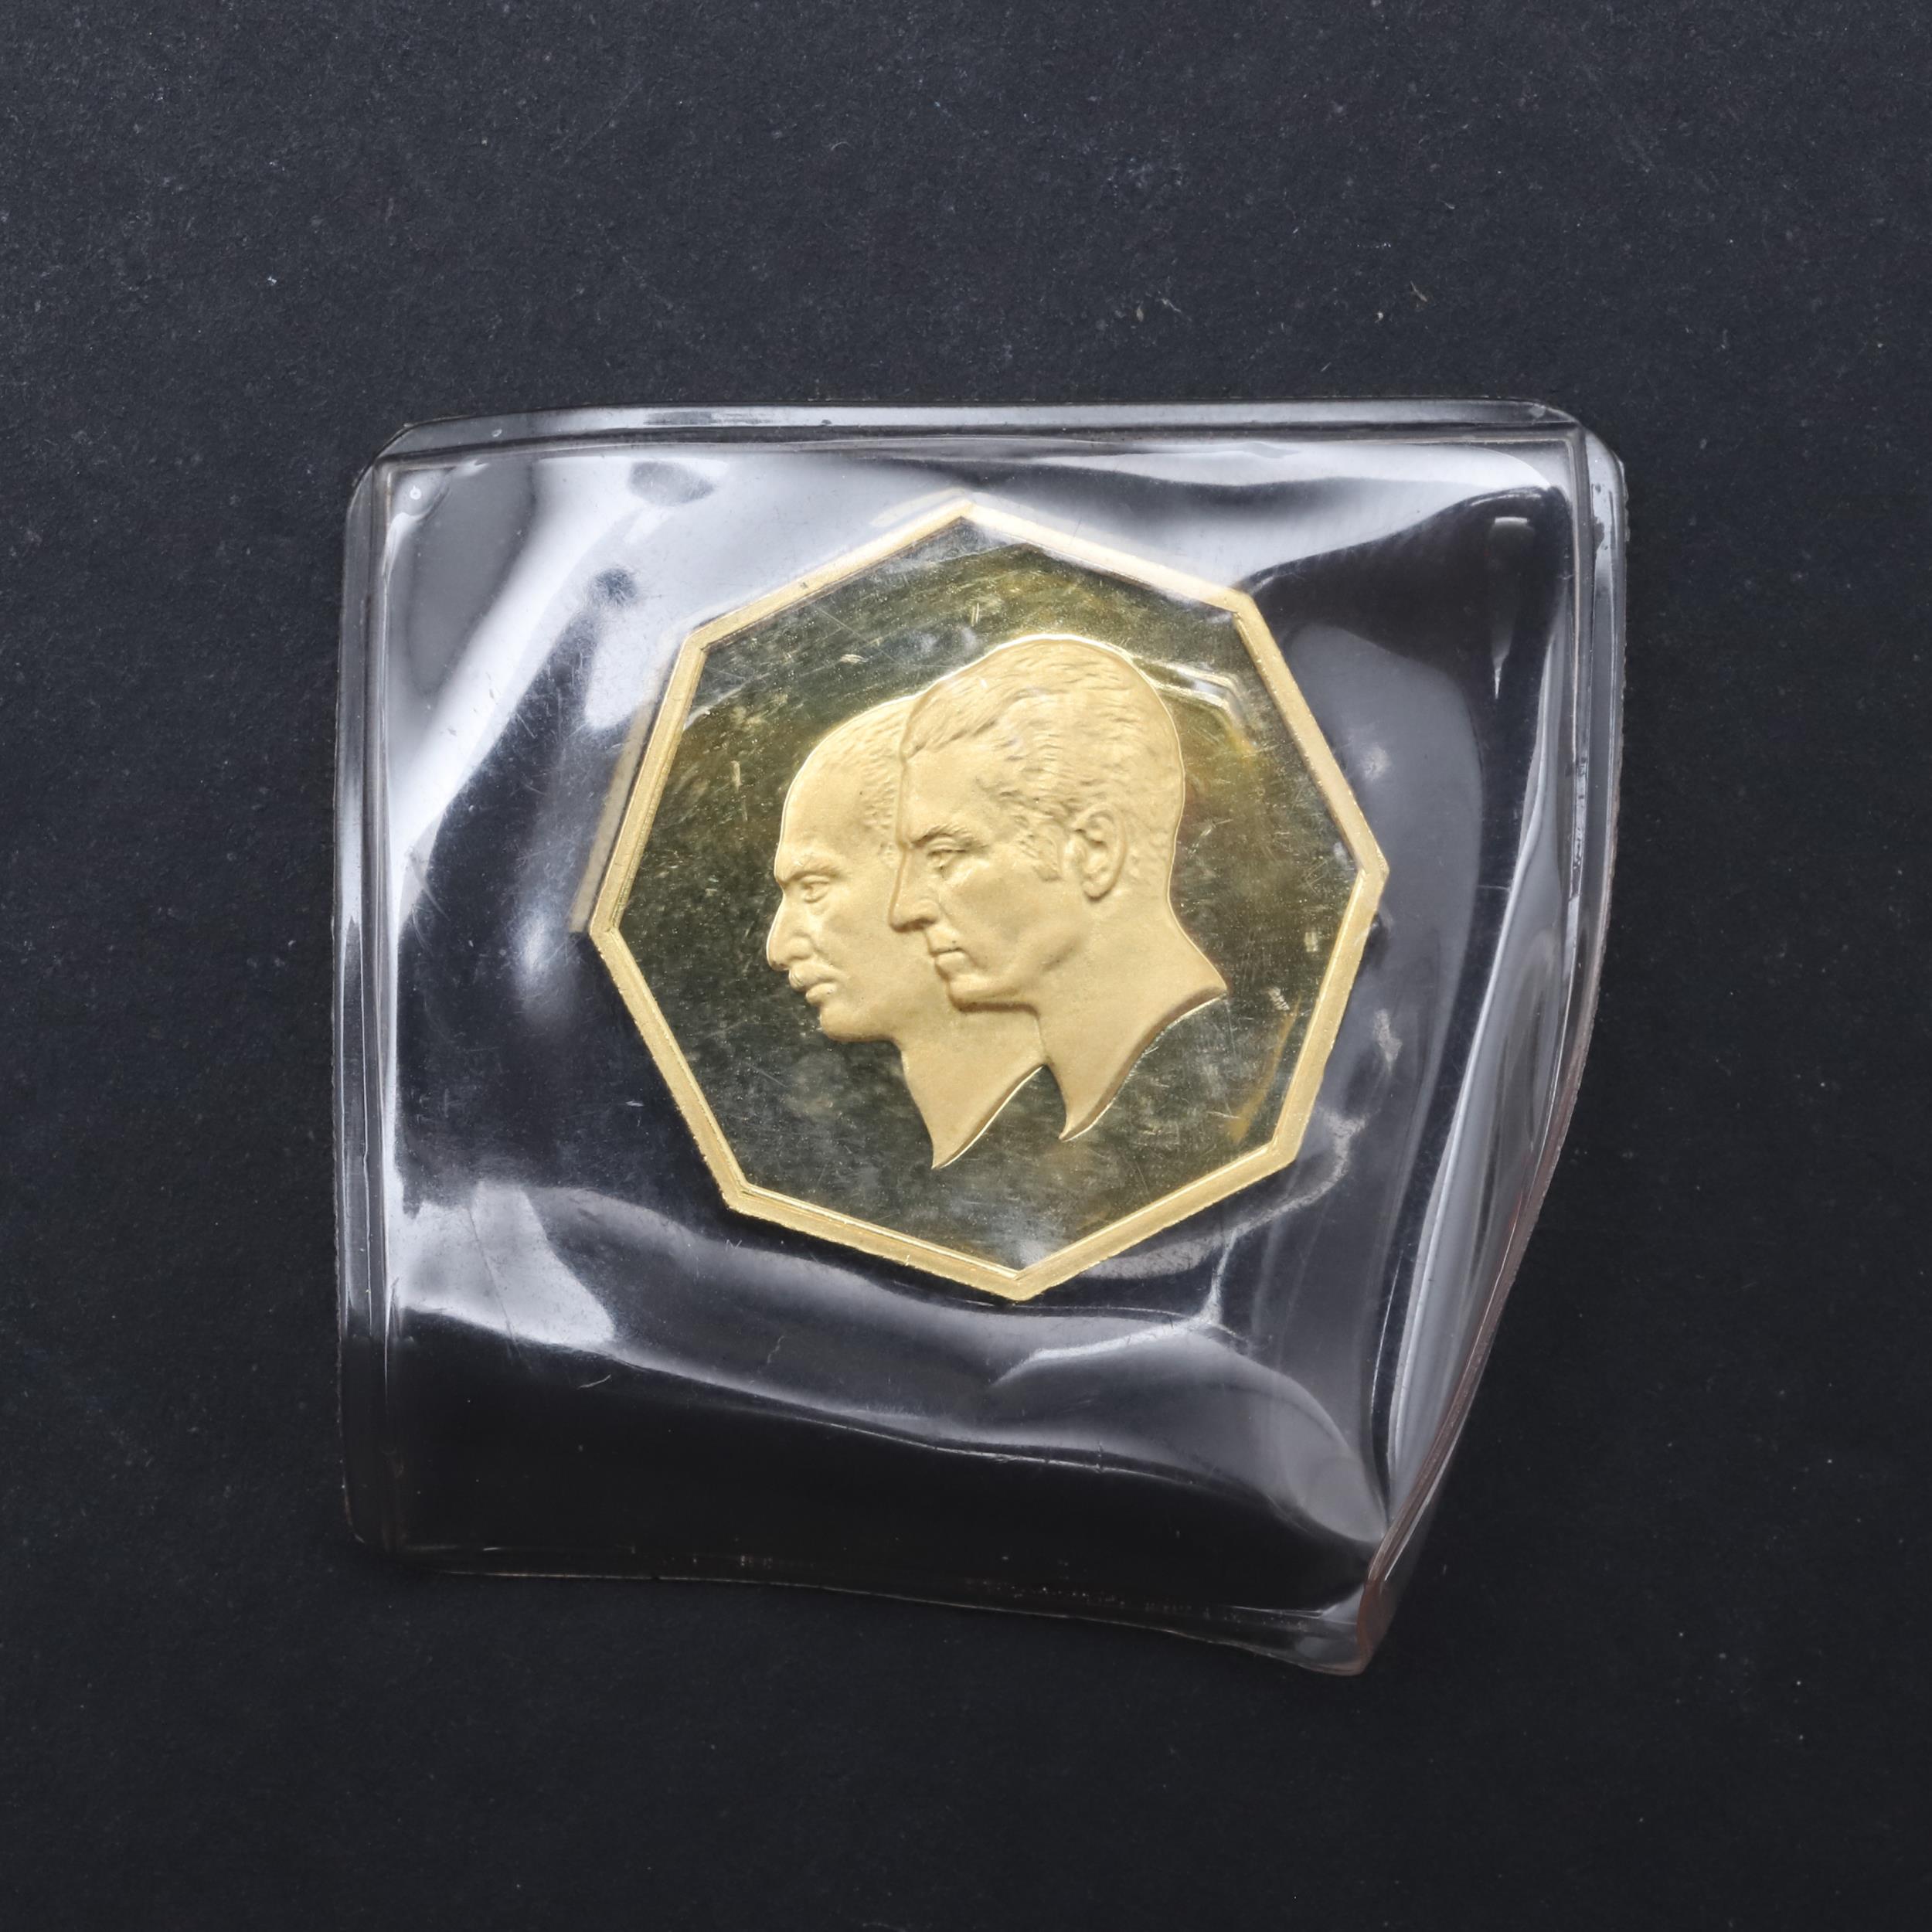 A PERSIAN GOLD COMMEMORATIVE COIN, 50 YEARS OF THE PAHLAVI DYNASTY. 1976.